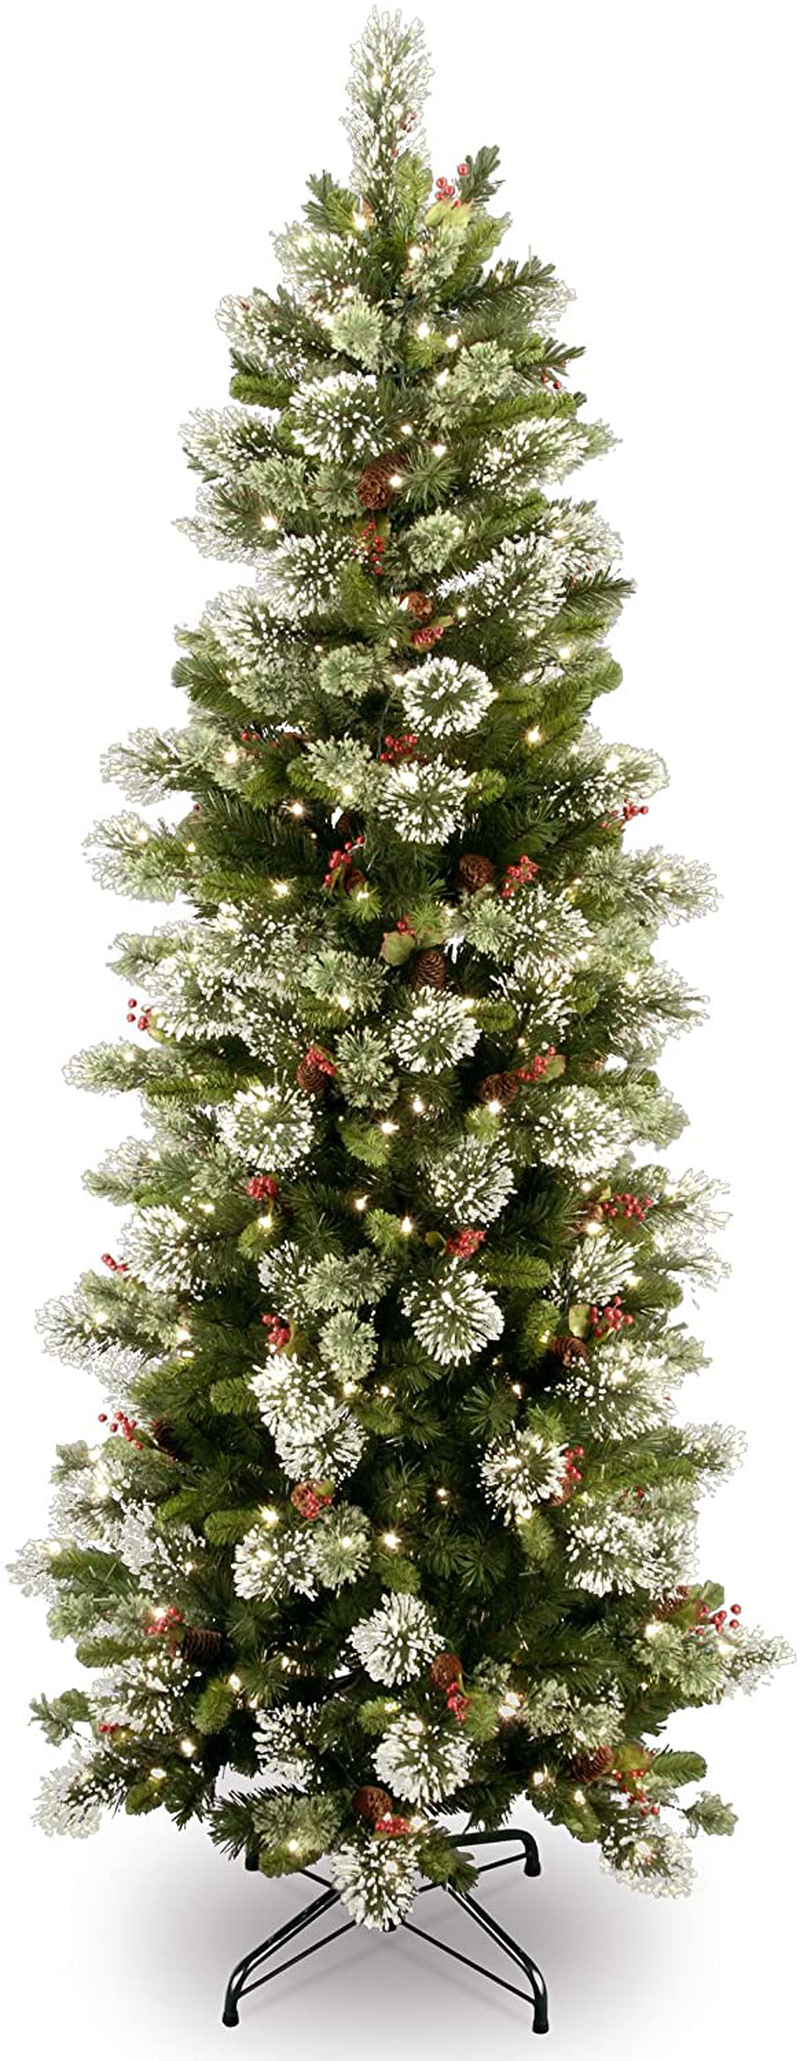 National Tree Company Pre-lit Artificial Christmas Tree | Includes Pre-strung White Lights and Stand | Flocked with Cones, Red Berries and Snowflakes | Wintry Pine Slim - 7.5 ft Home & Garden > Decor > Seasonal & Holiday Decorations > Christmas Tree Stands National Tree Company Slim 6.5 ft 